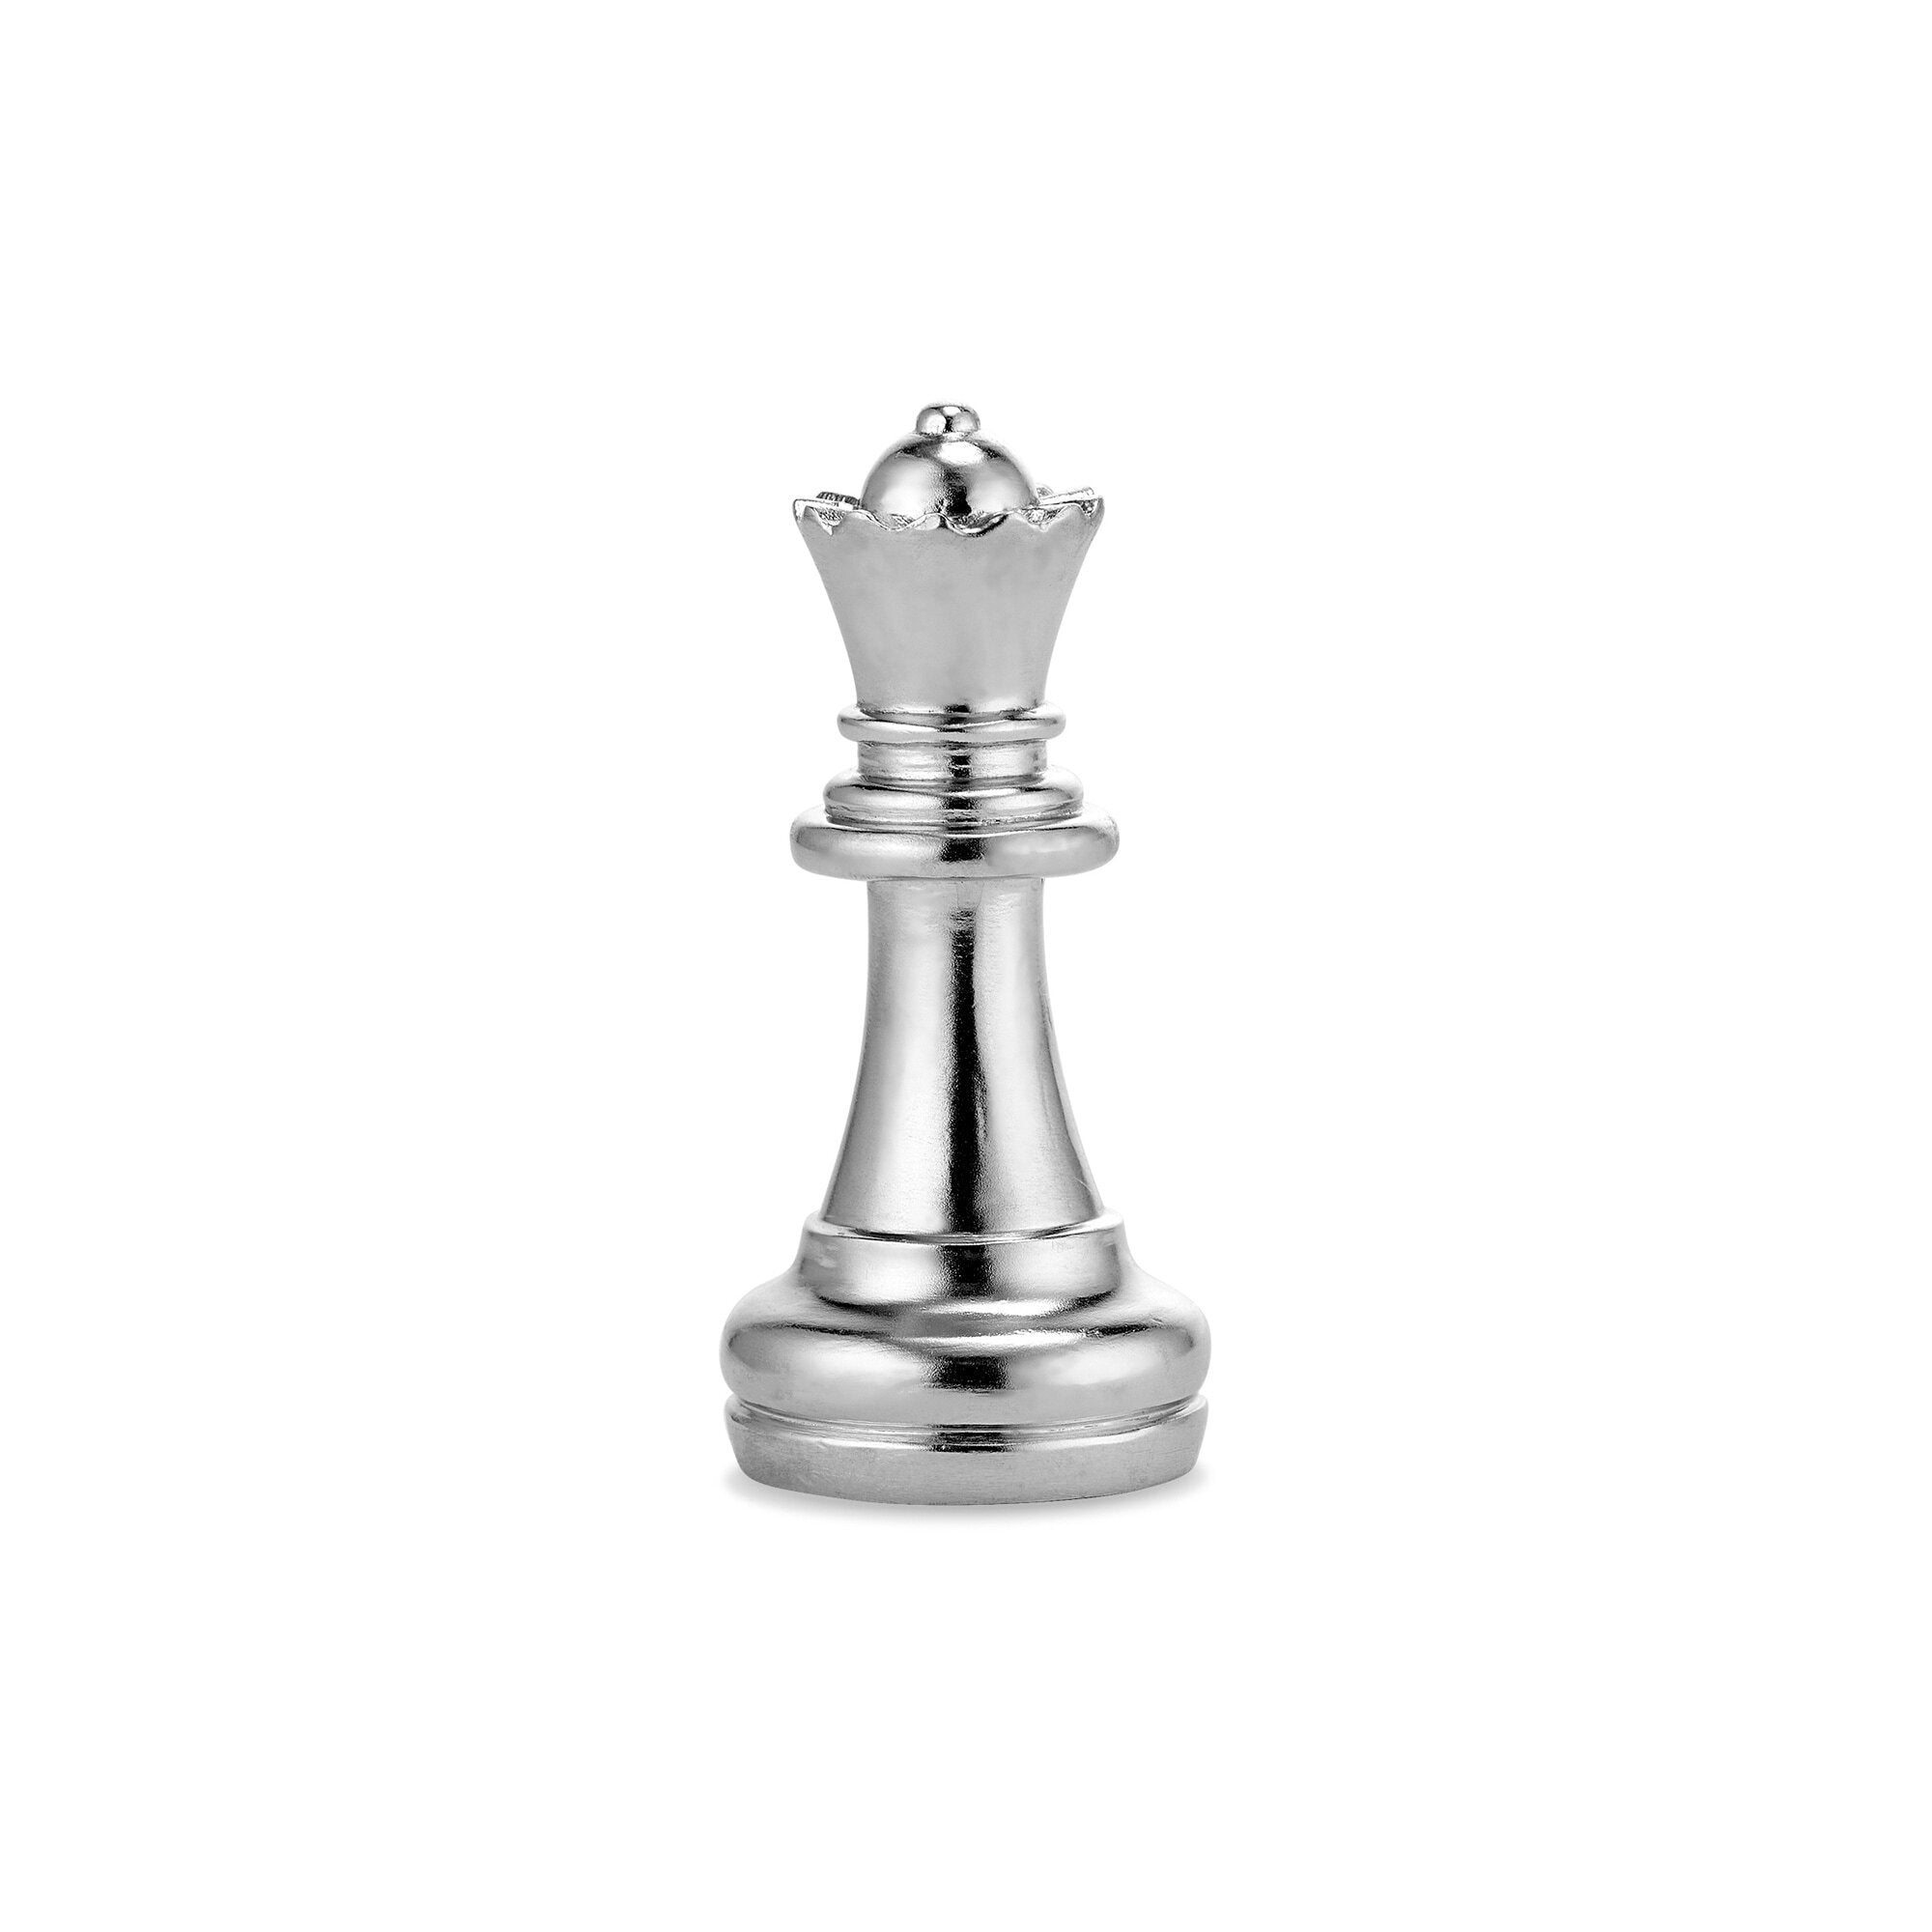 Top game assets tagged Chess 